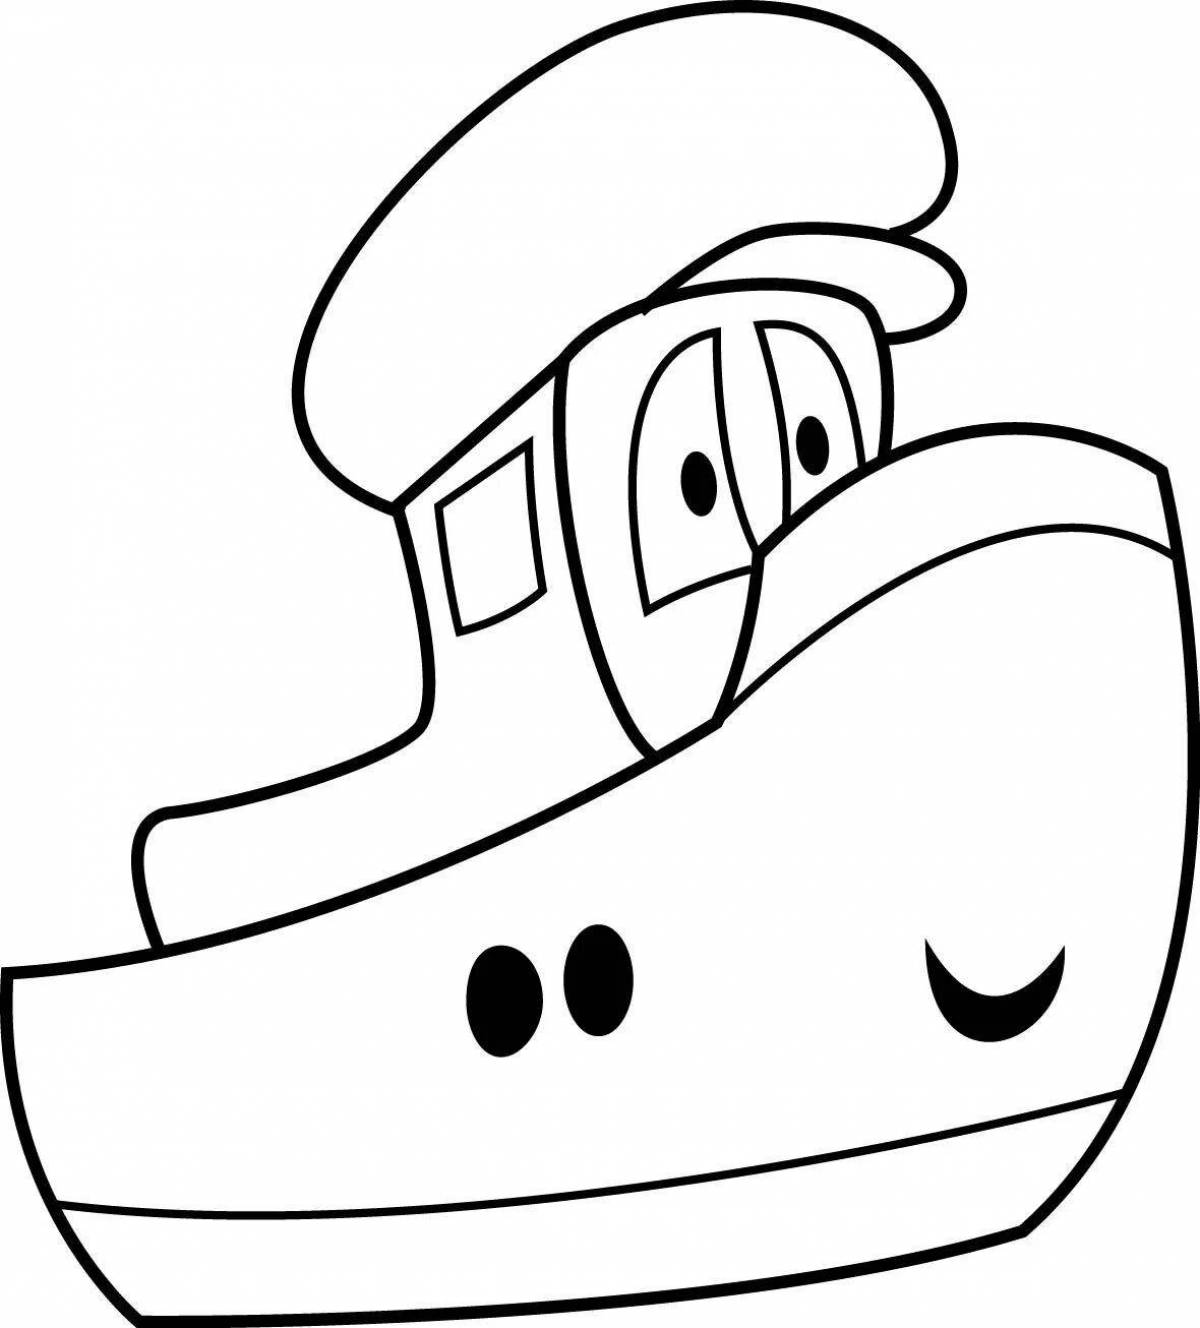 Incredible ship coloring pages for kids